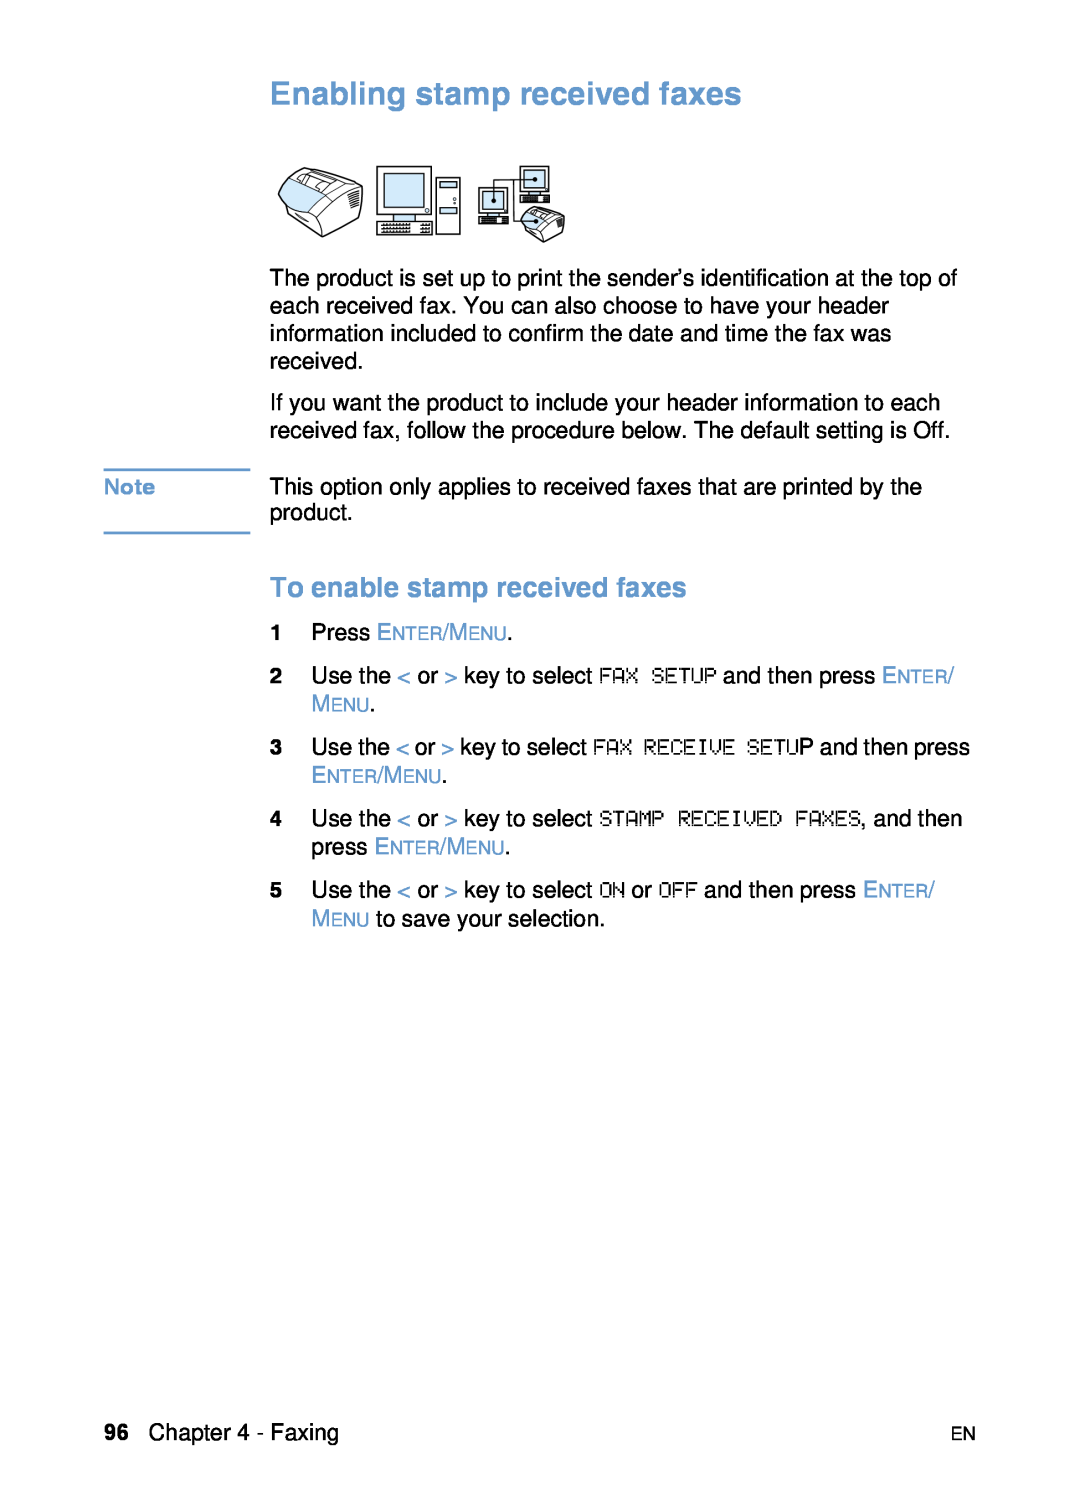 HP 3200 manual Enabling stamp received faxes, To enable stamp received faxes 